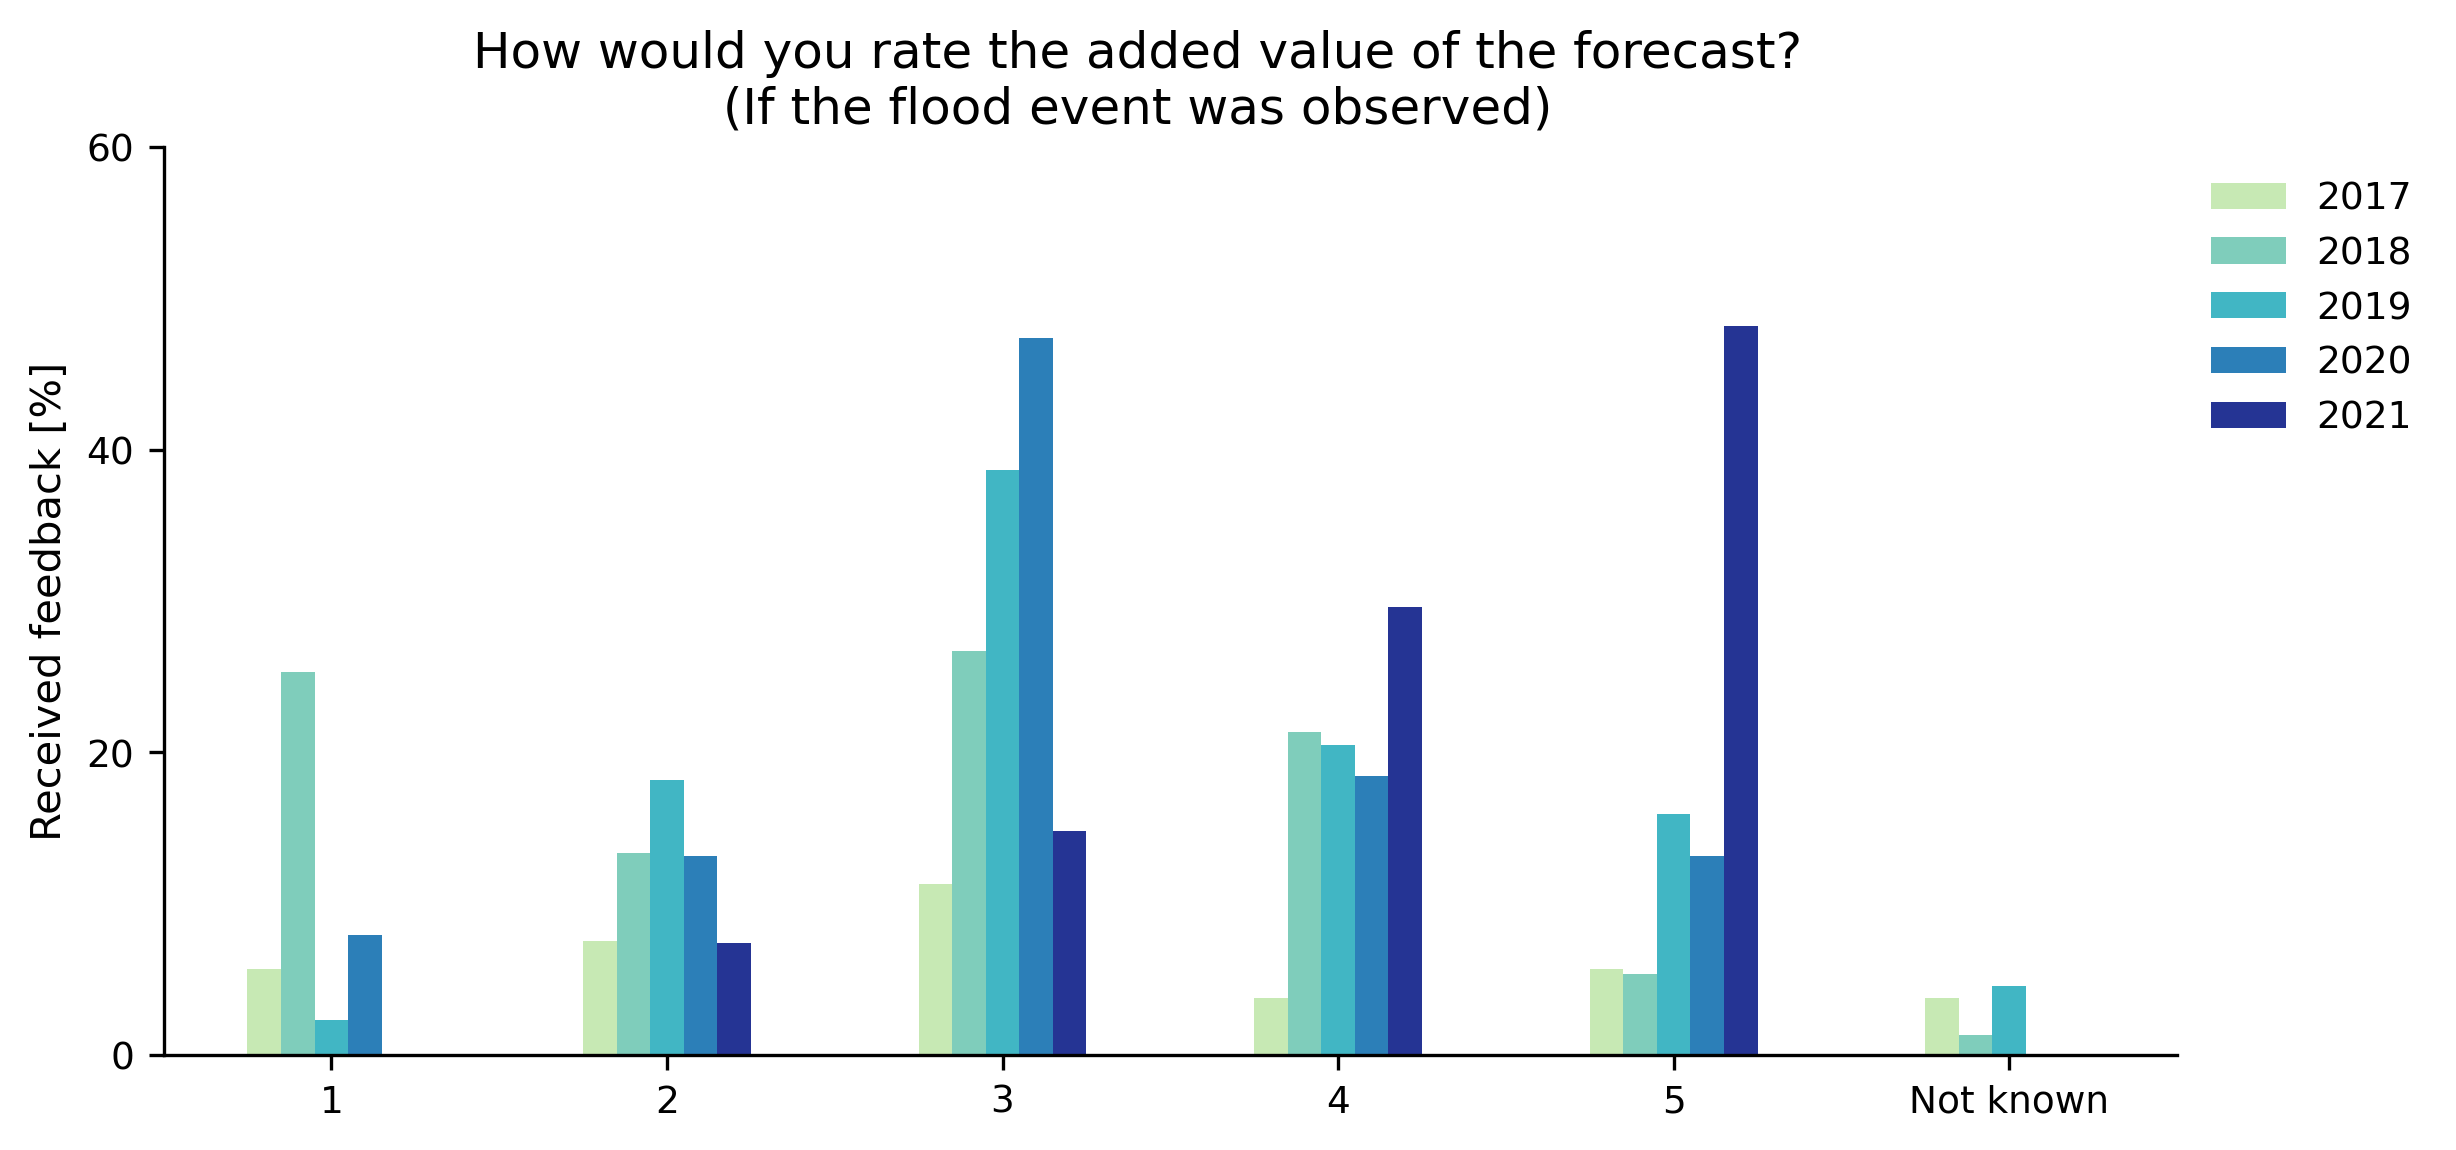 Figure 9. Partners' response to the question "How would you rate the added value of the forecast?" of the forecast survey for instances where a flood event was observed in connection with the Formal Flood Notification. A value of 1 corresponds to little to no added value and a value of 5 corresponds to a significant added value.